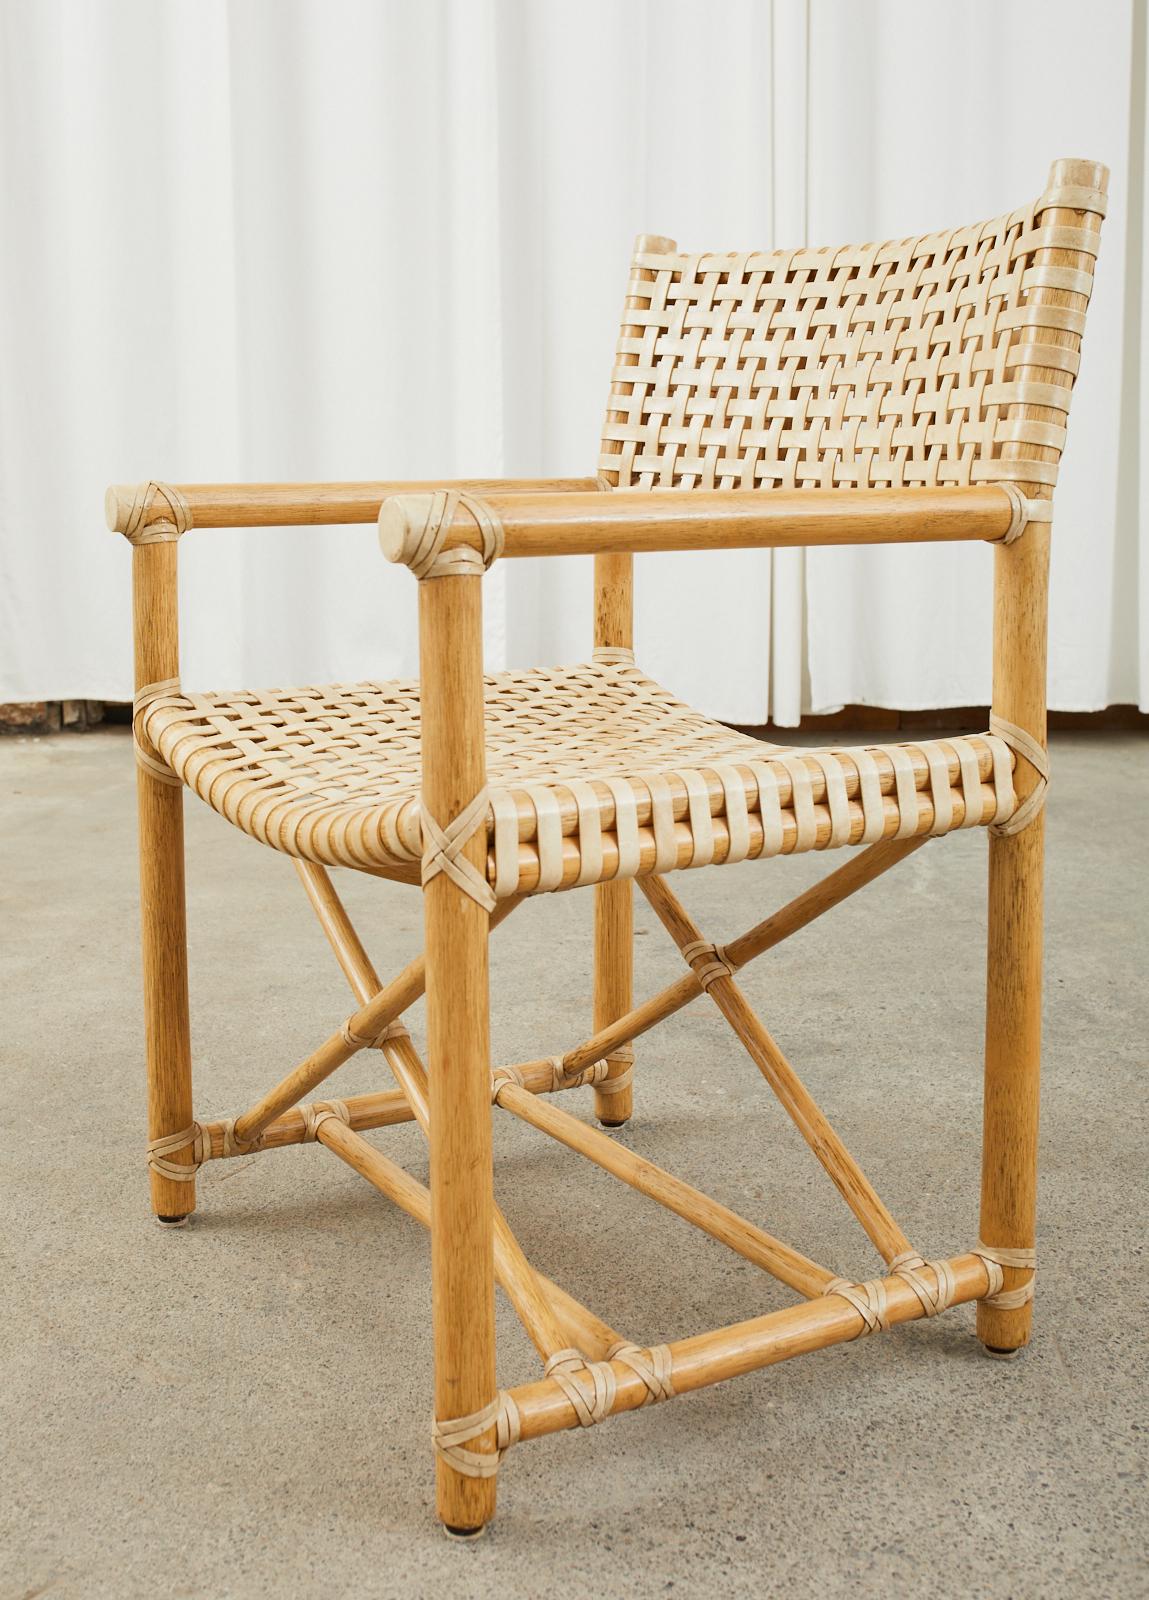 Genuine set of eight rare McGuire Antalya directors style dining armchairs featuring lattice style laced rawhide woven leather seats and backs. Model #MCLM45 constructed with rattan poles lashed together with leather rawhide laces on the exposed